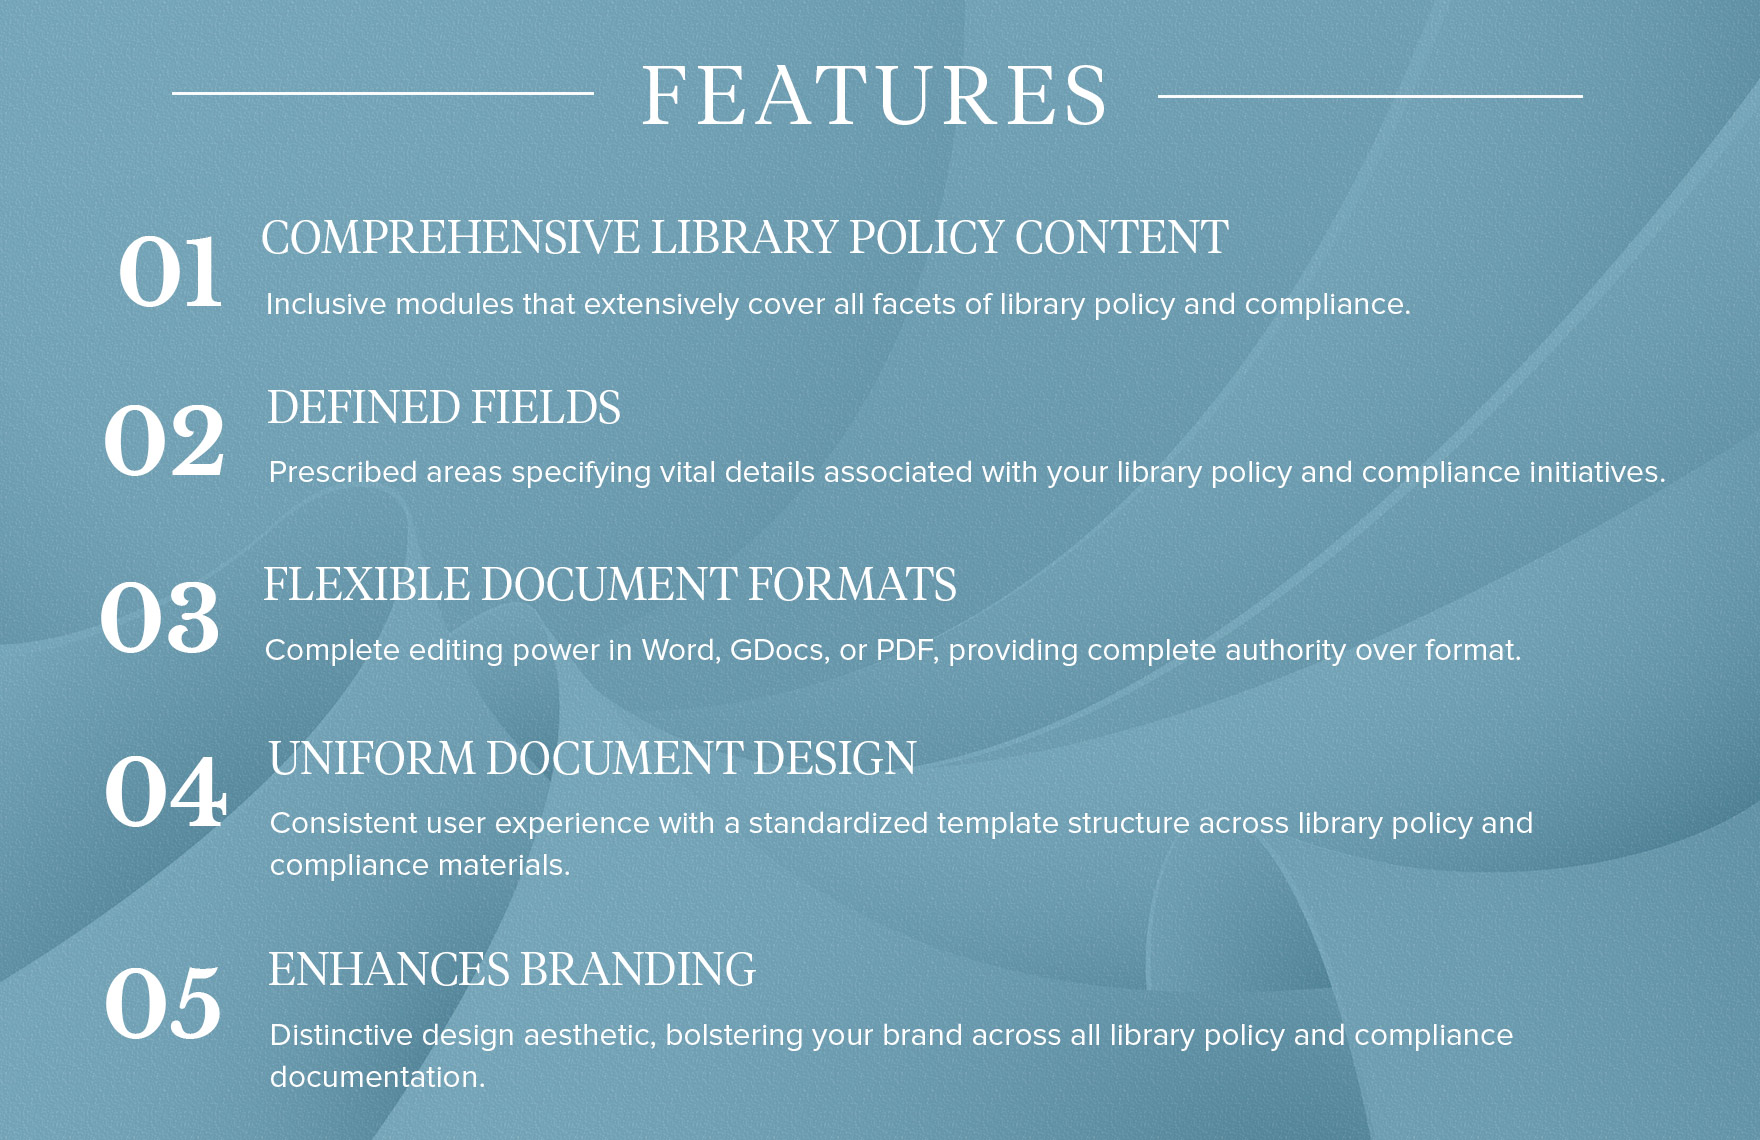 School Library Interlibrary Loan Policy Template